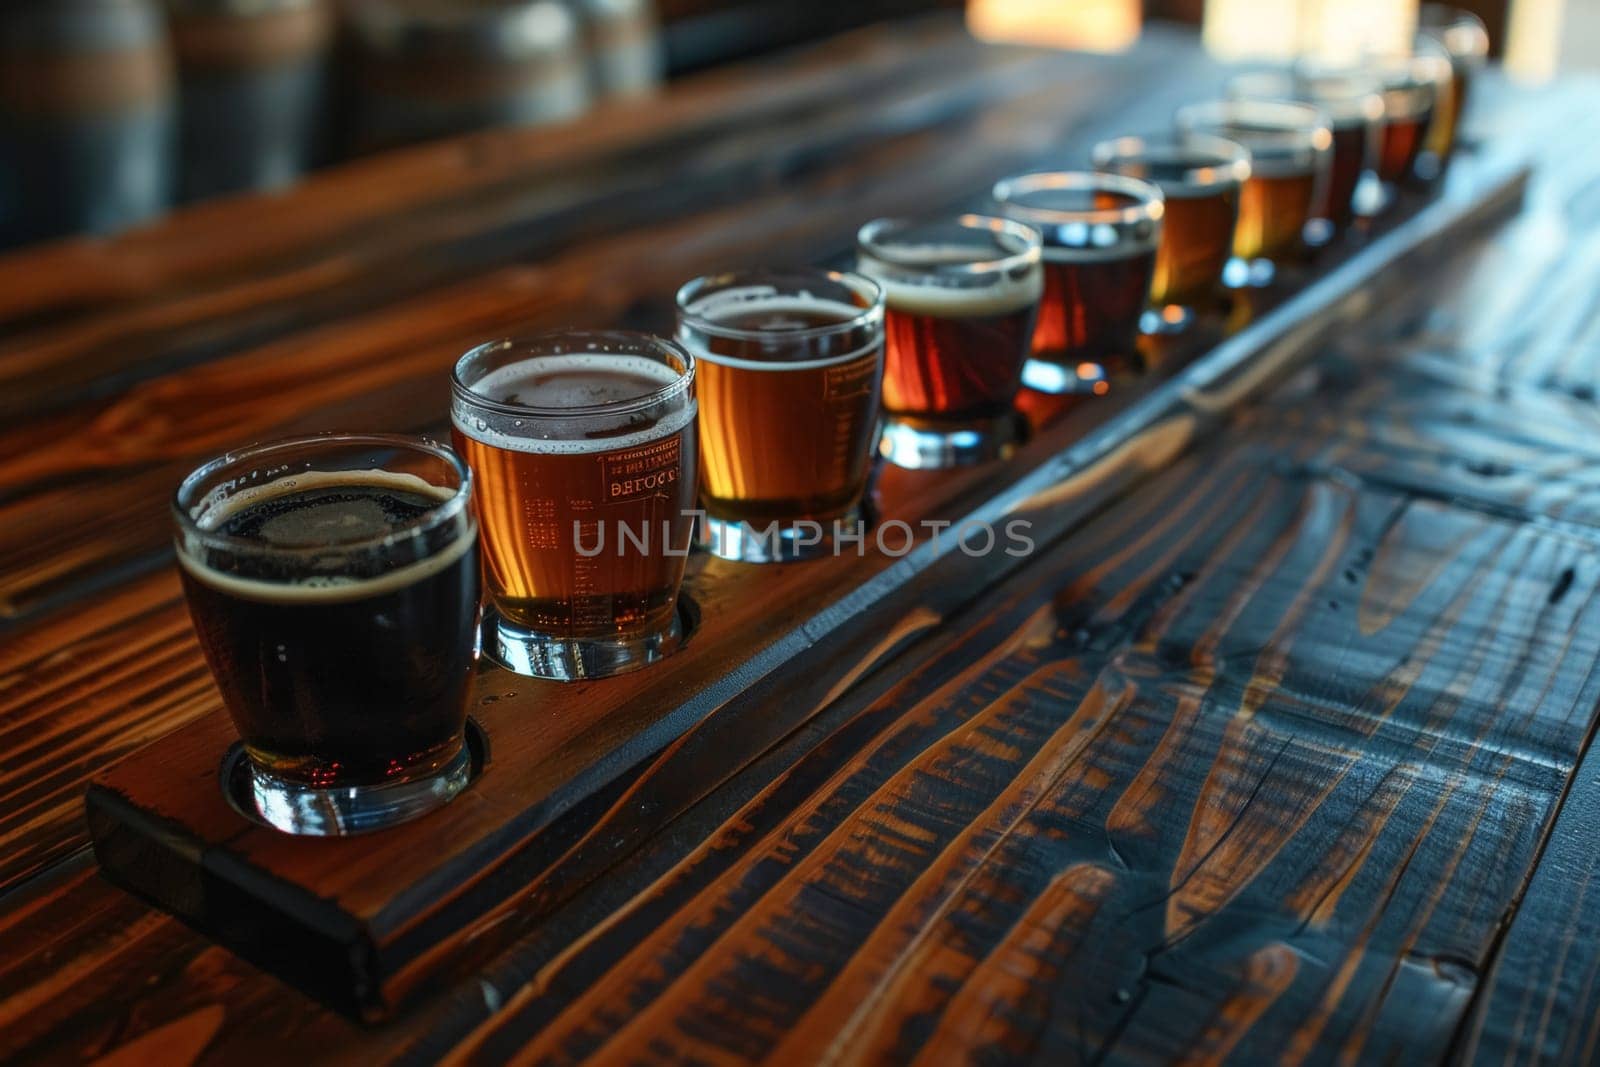 An array of craft beers presented in a tasting flight, showcasing a gradient of colors from pale gold to deep amber on a rustic wooden bar top